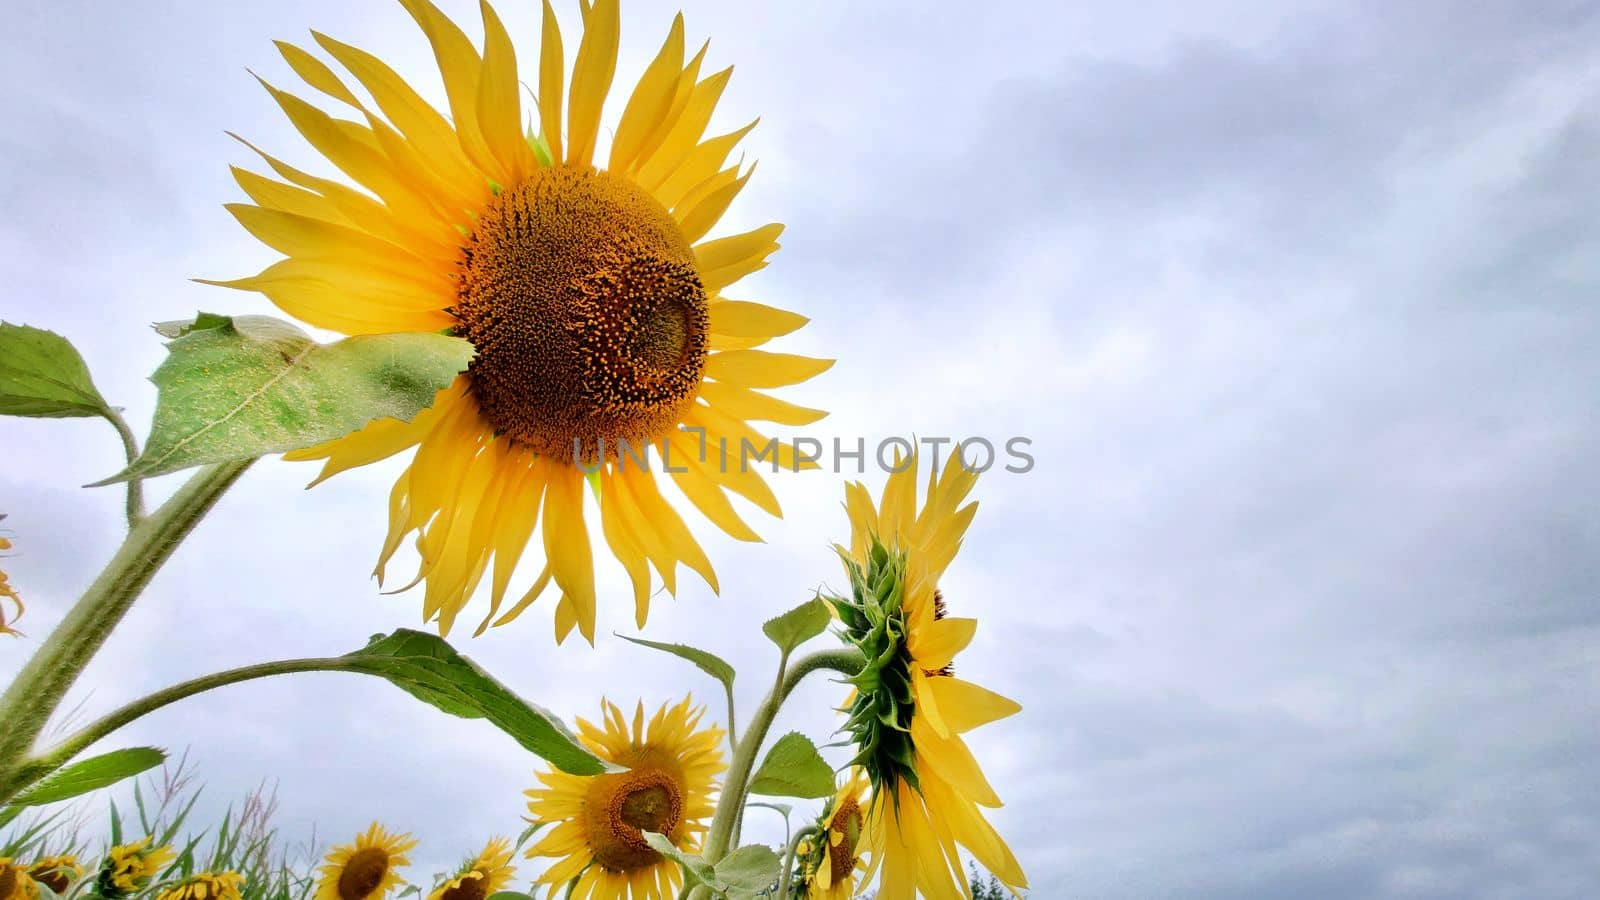 Yellow sunflowers on a cloudy day, a close-up view from below.Texture or background.